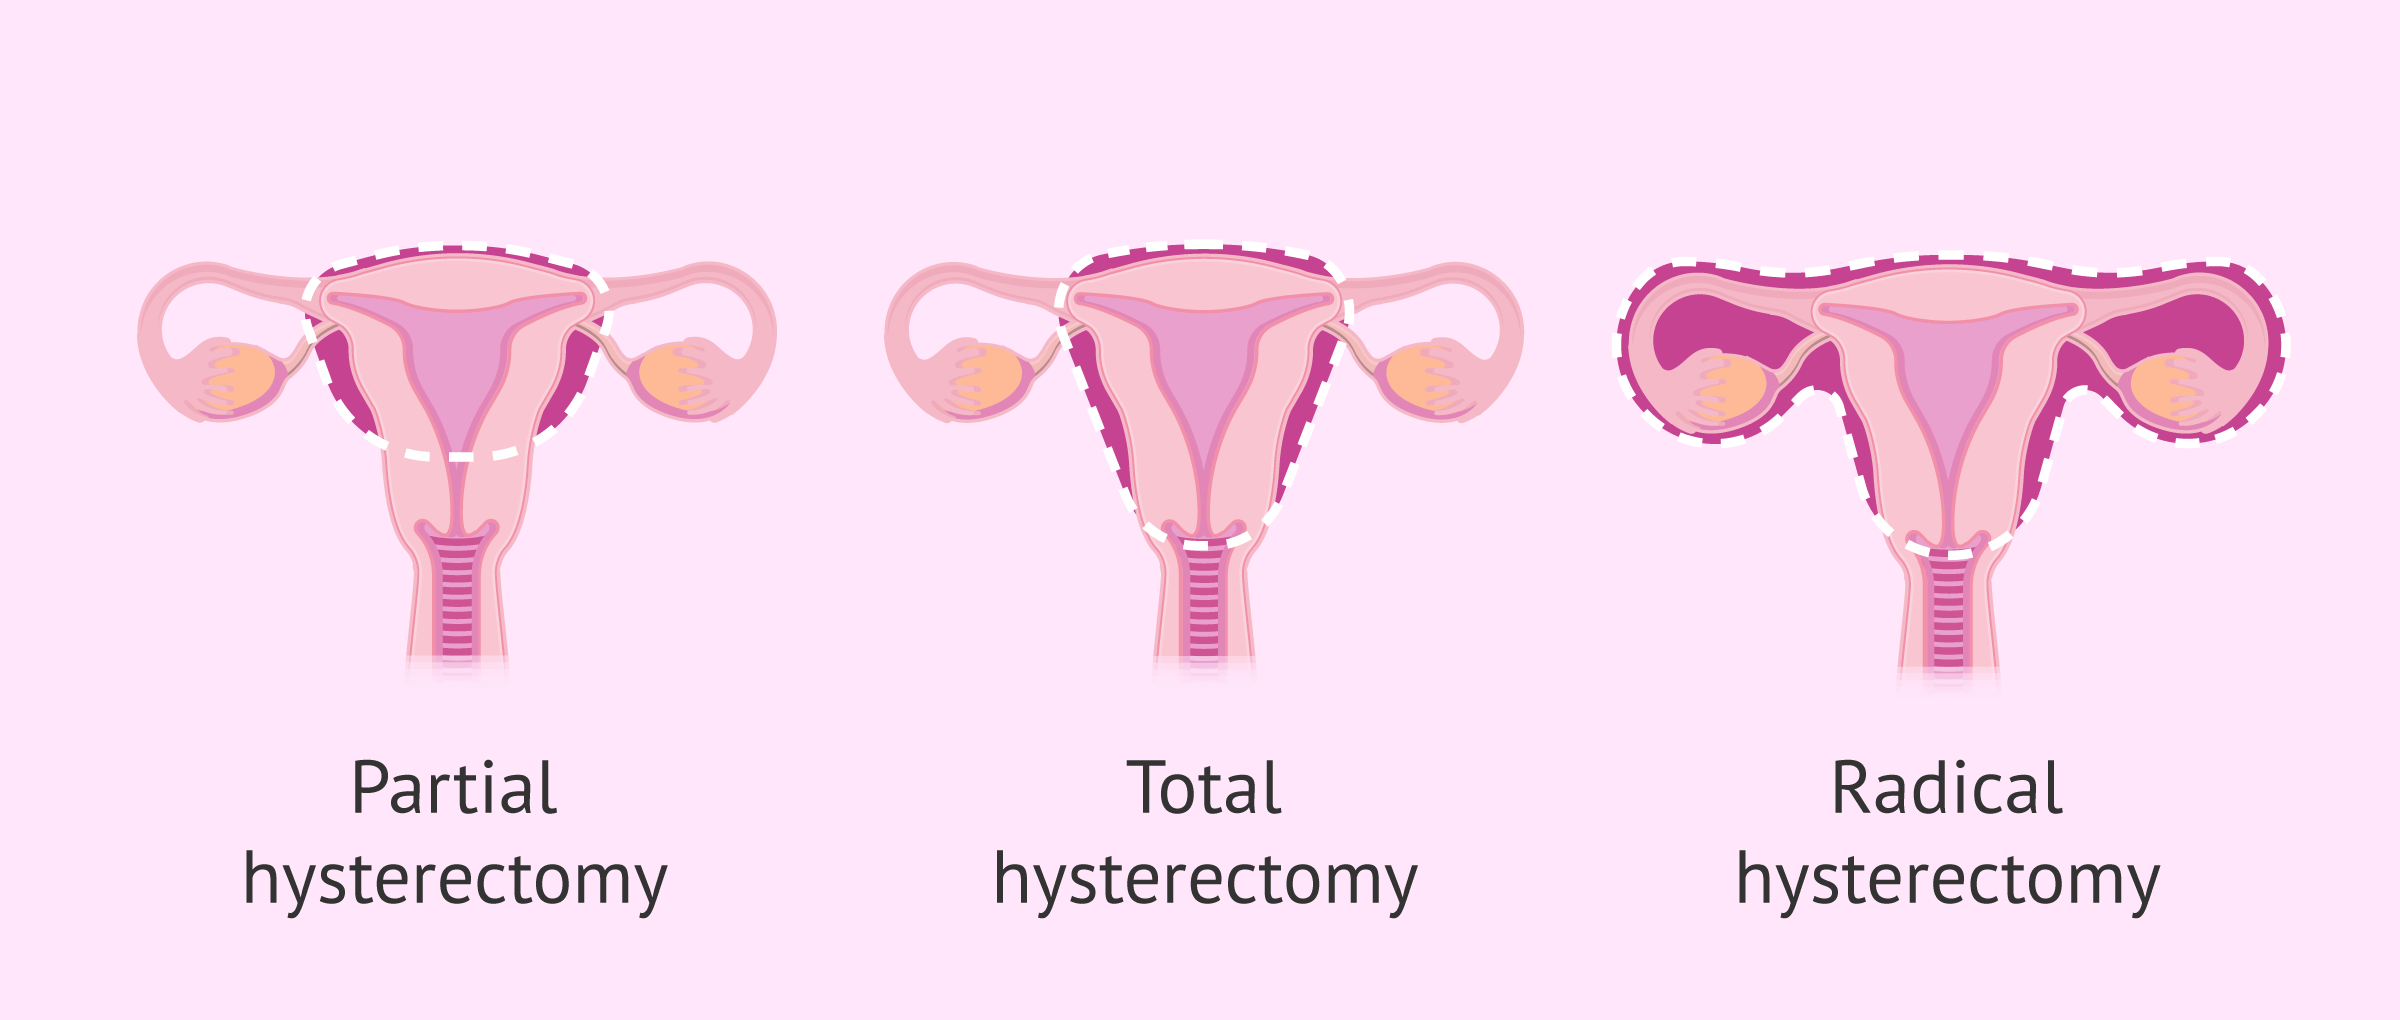 how long does a radical hysterectomy take